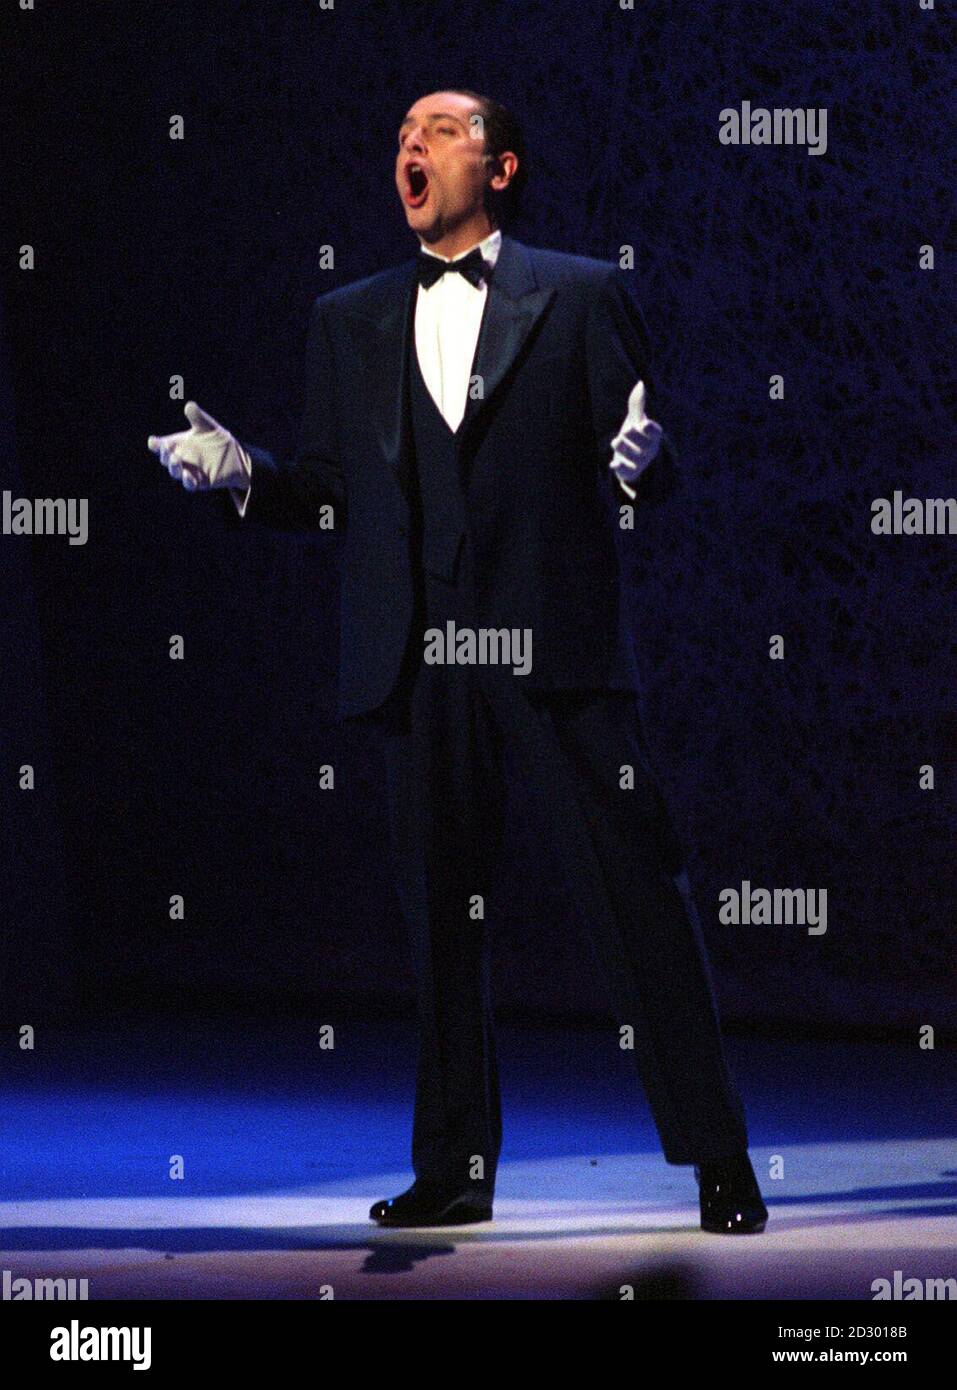 PA NEWS PHOTO 28/10/98 ENTERTAINER BRIAN CONLEY ON STAGE AT THE PRINCE'S TRUST COMEDY GALA AT THE LYCEUM THEATRE IN LONDON. THE EVENT WAS TO MARK THE PRINCE OF WALES'S 50TH BIRTHDAY (14/11/98). Stock Photo